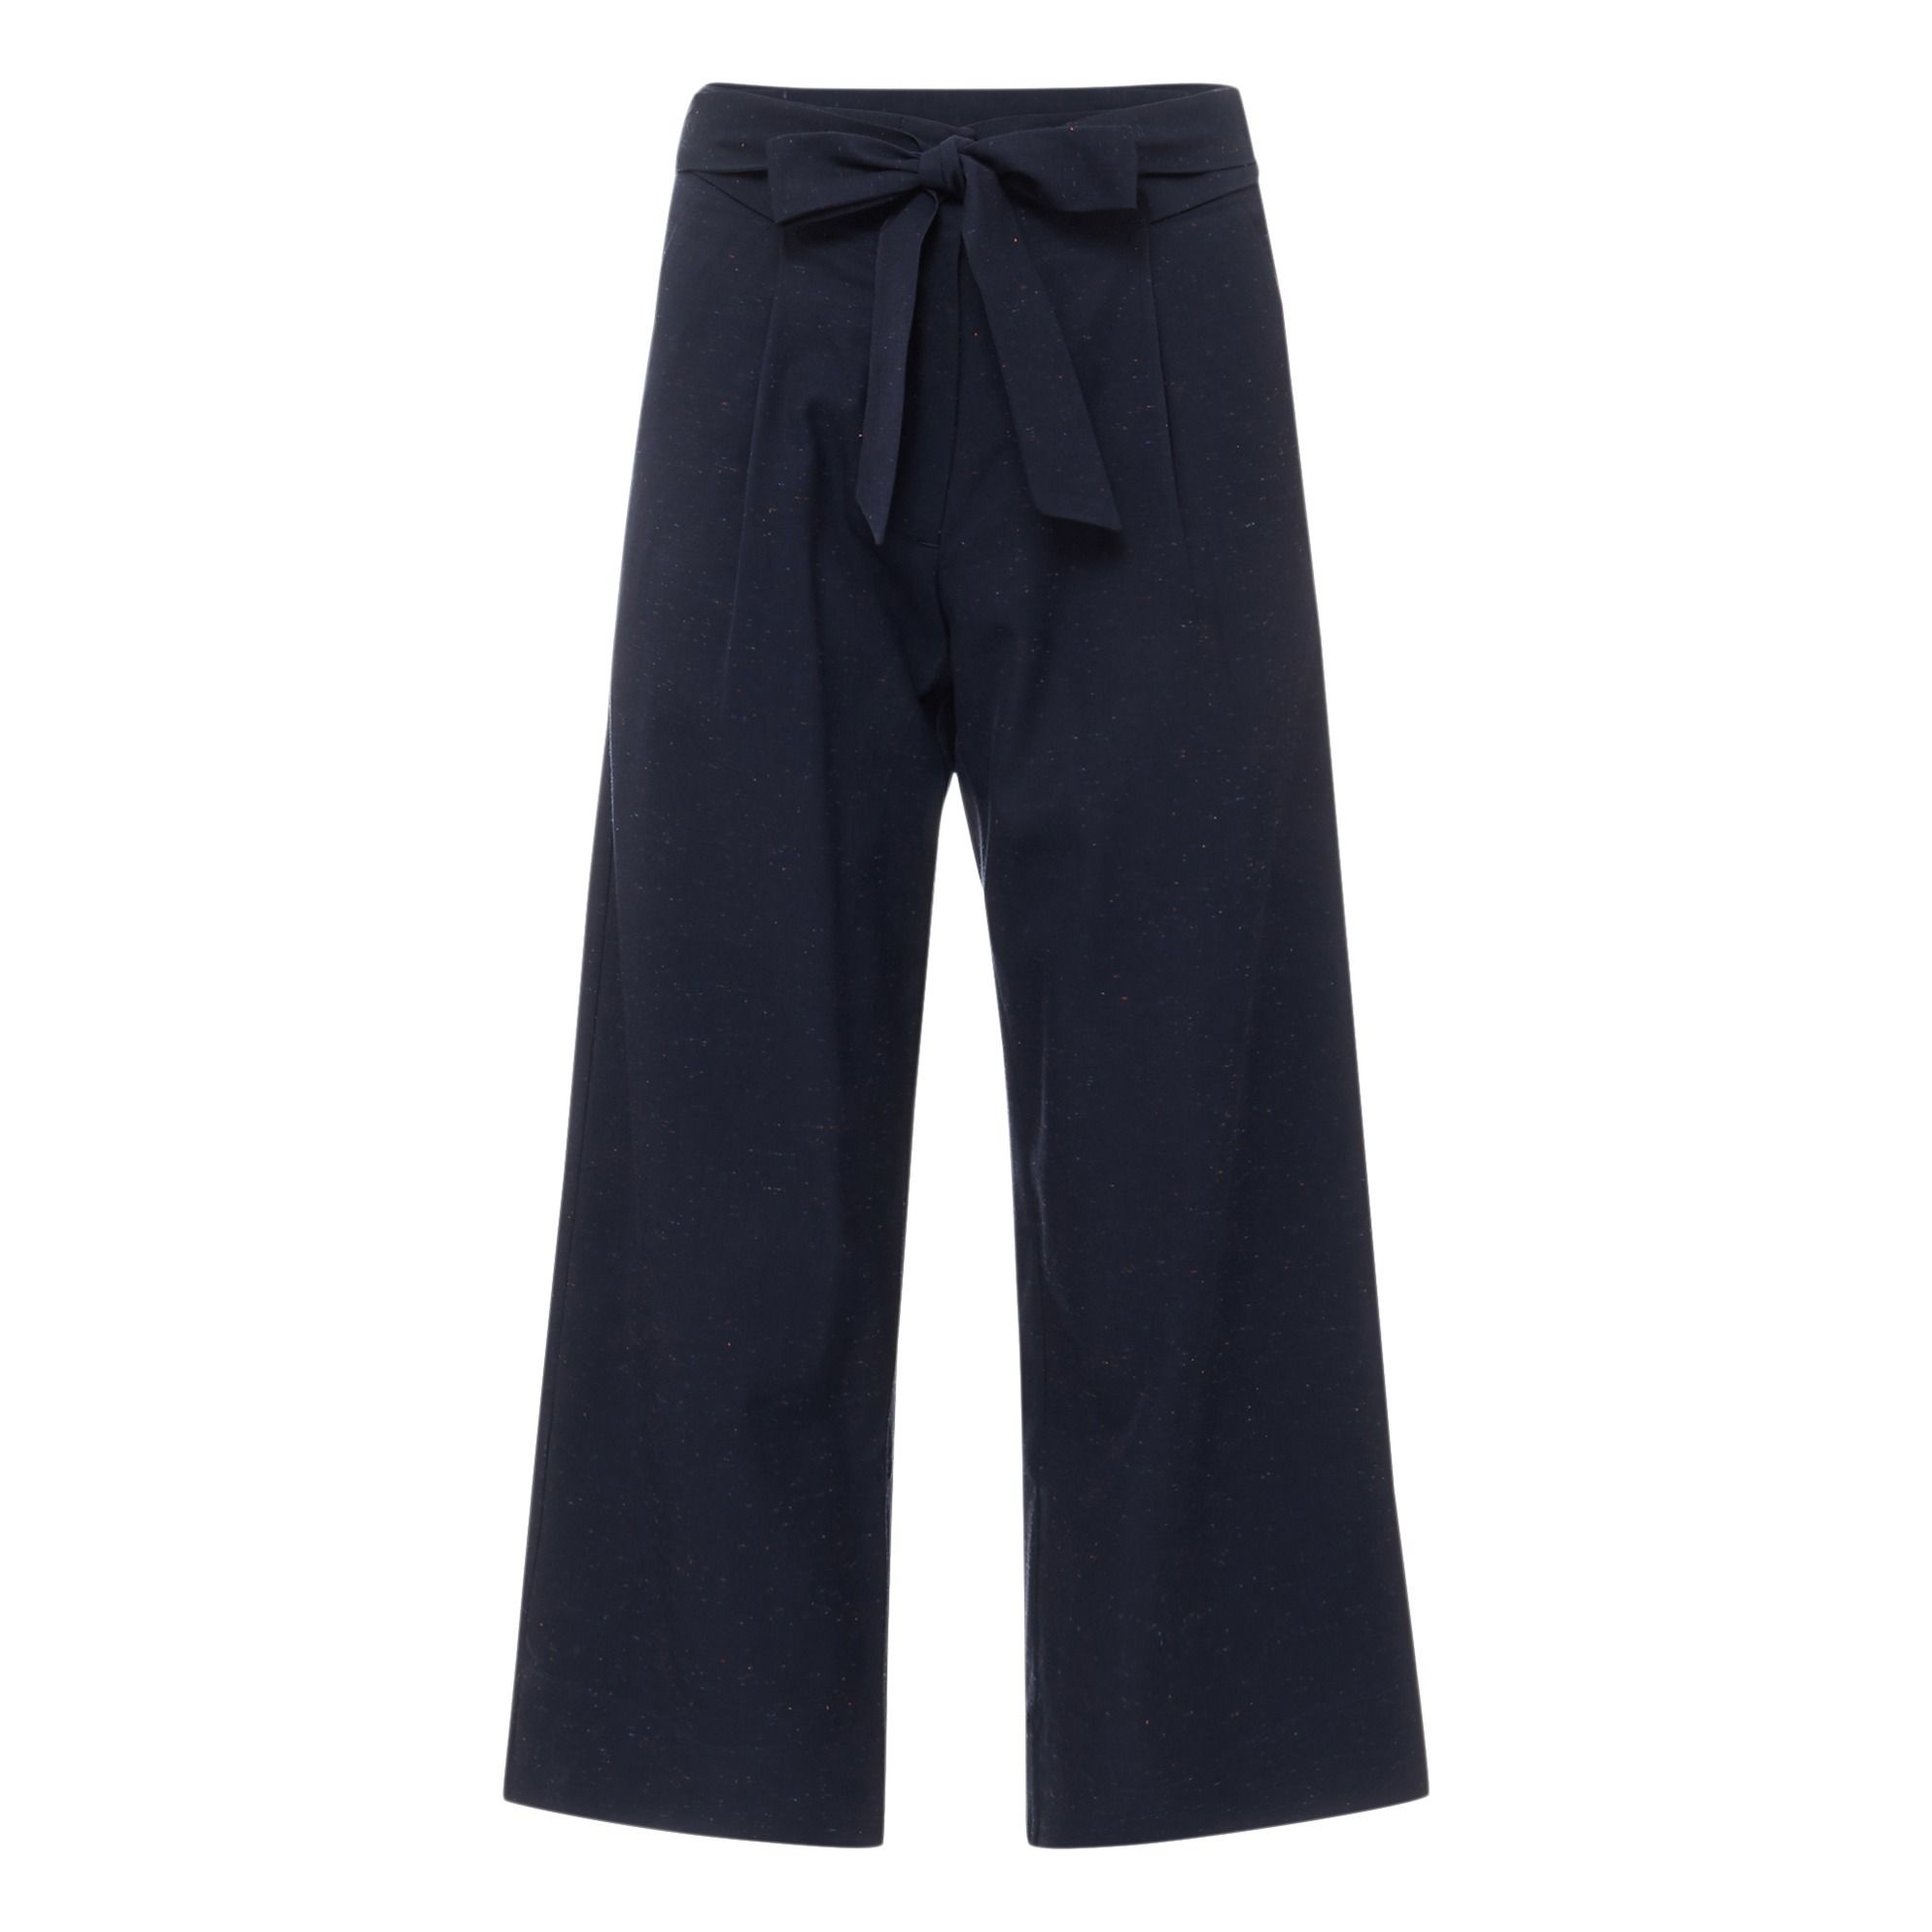 Palmador trousers Navy blue Sessun Fashion Adult